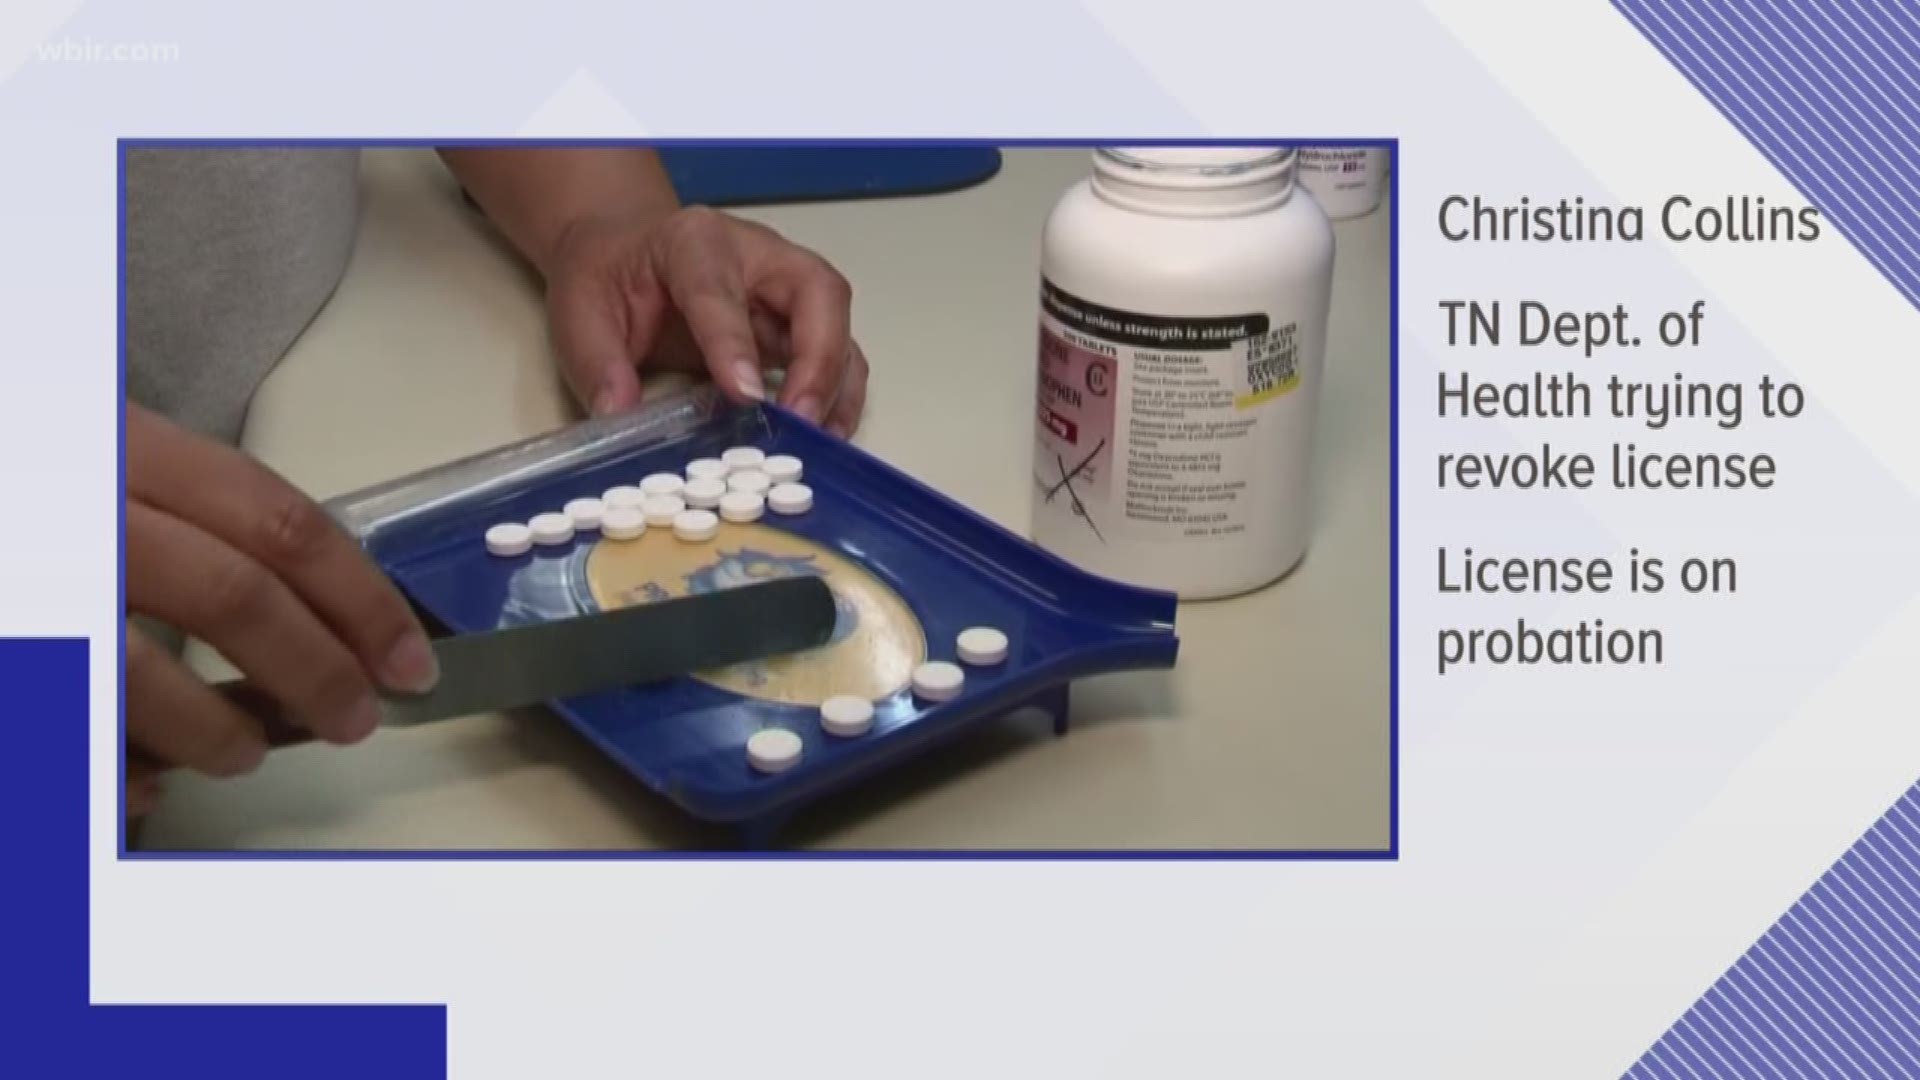 State health leaders are trying to revoke the license of a Knoxville nurse practitioner who prescribed a patient 51 pills a day.